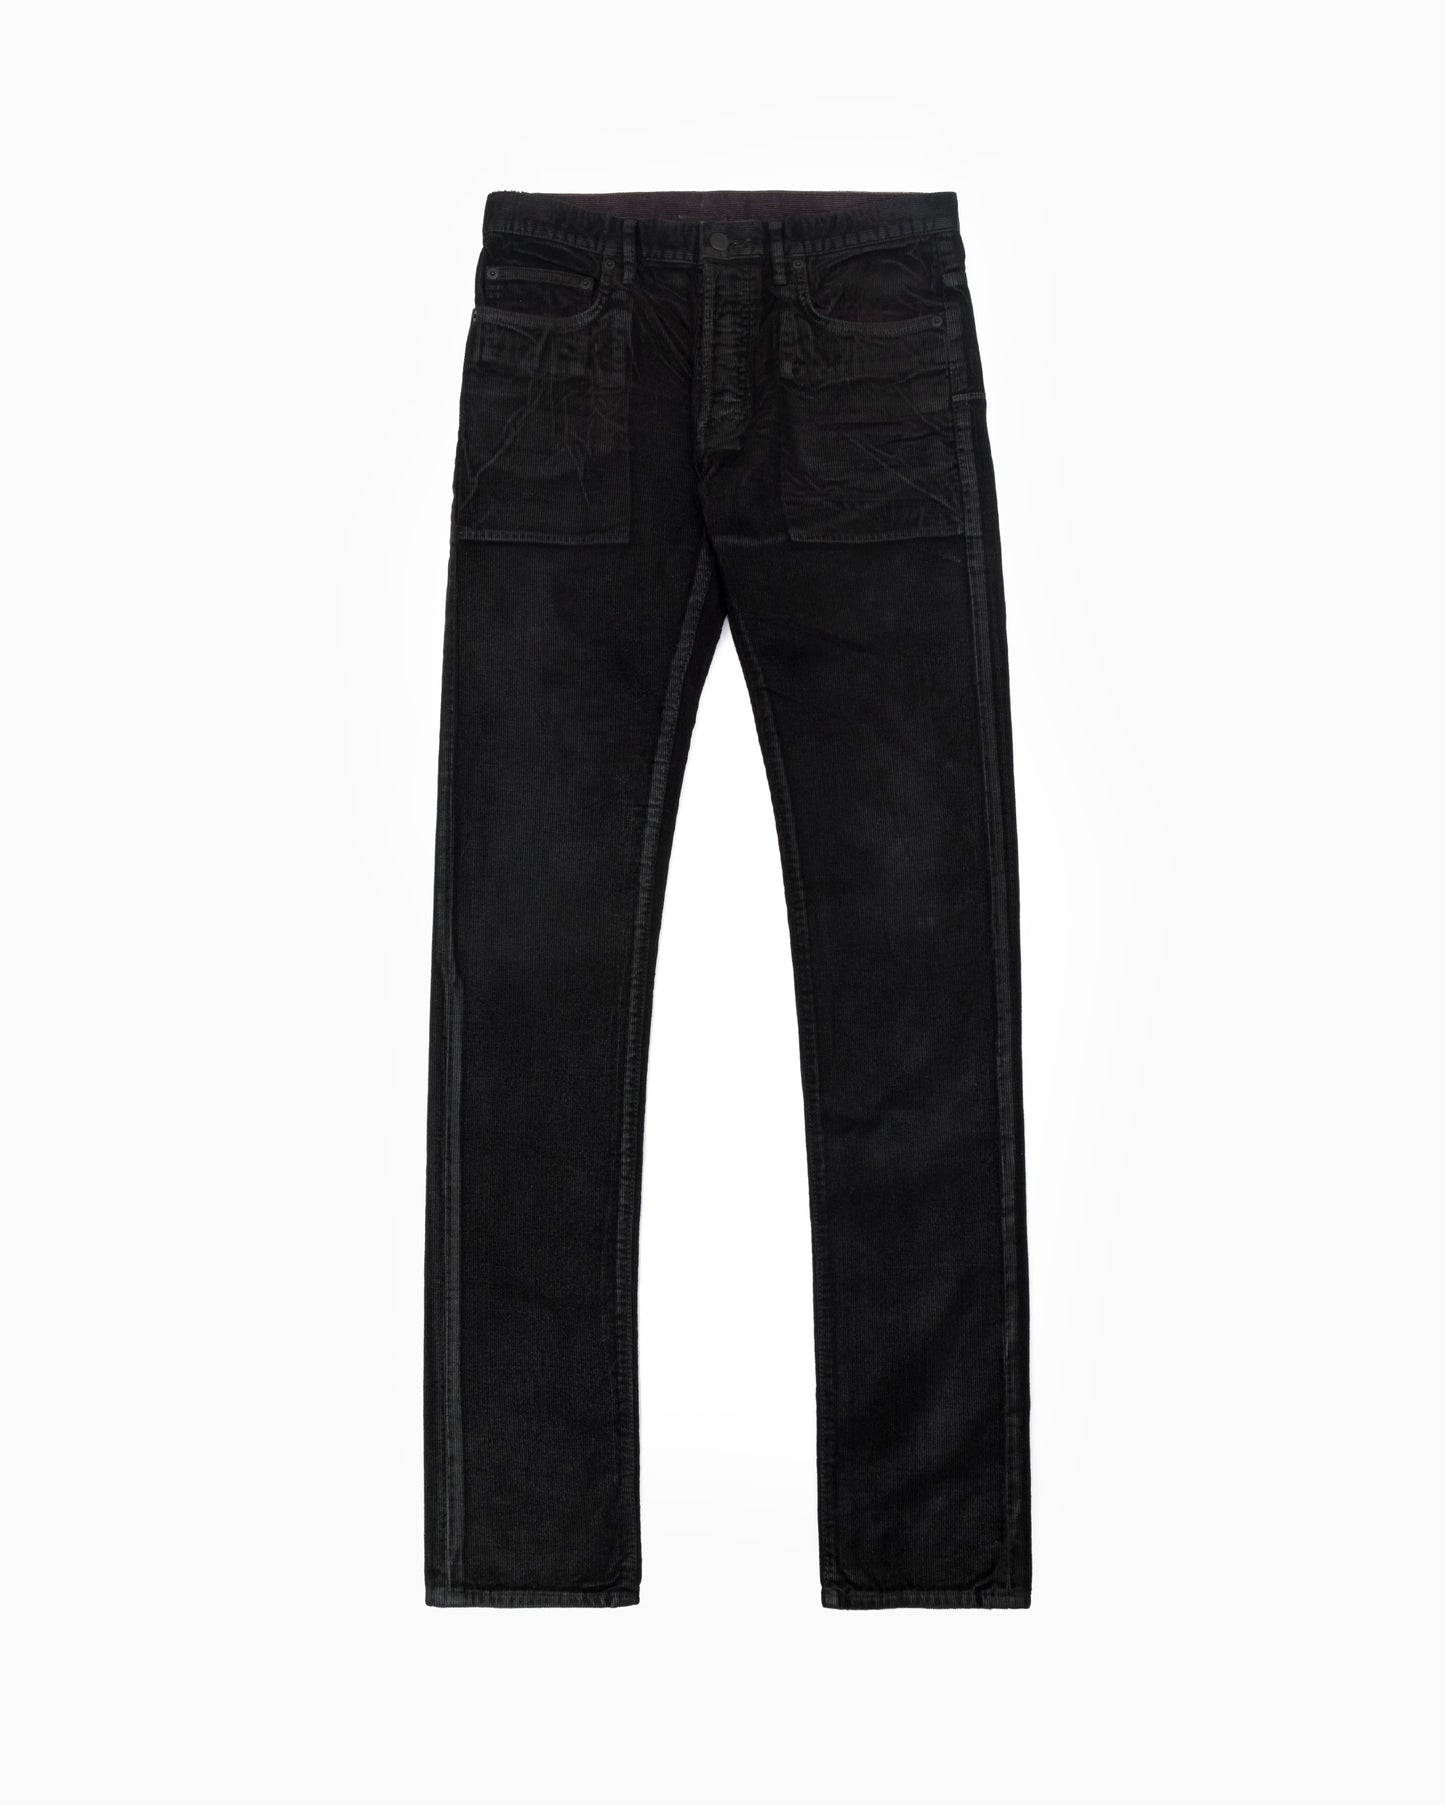 Dior Homme AW08 Waxed Corduroy Jeans